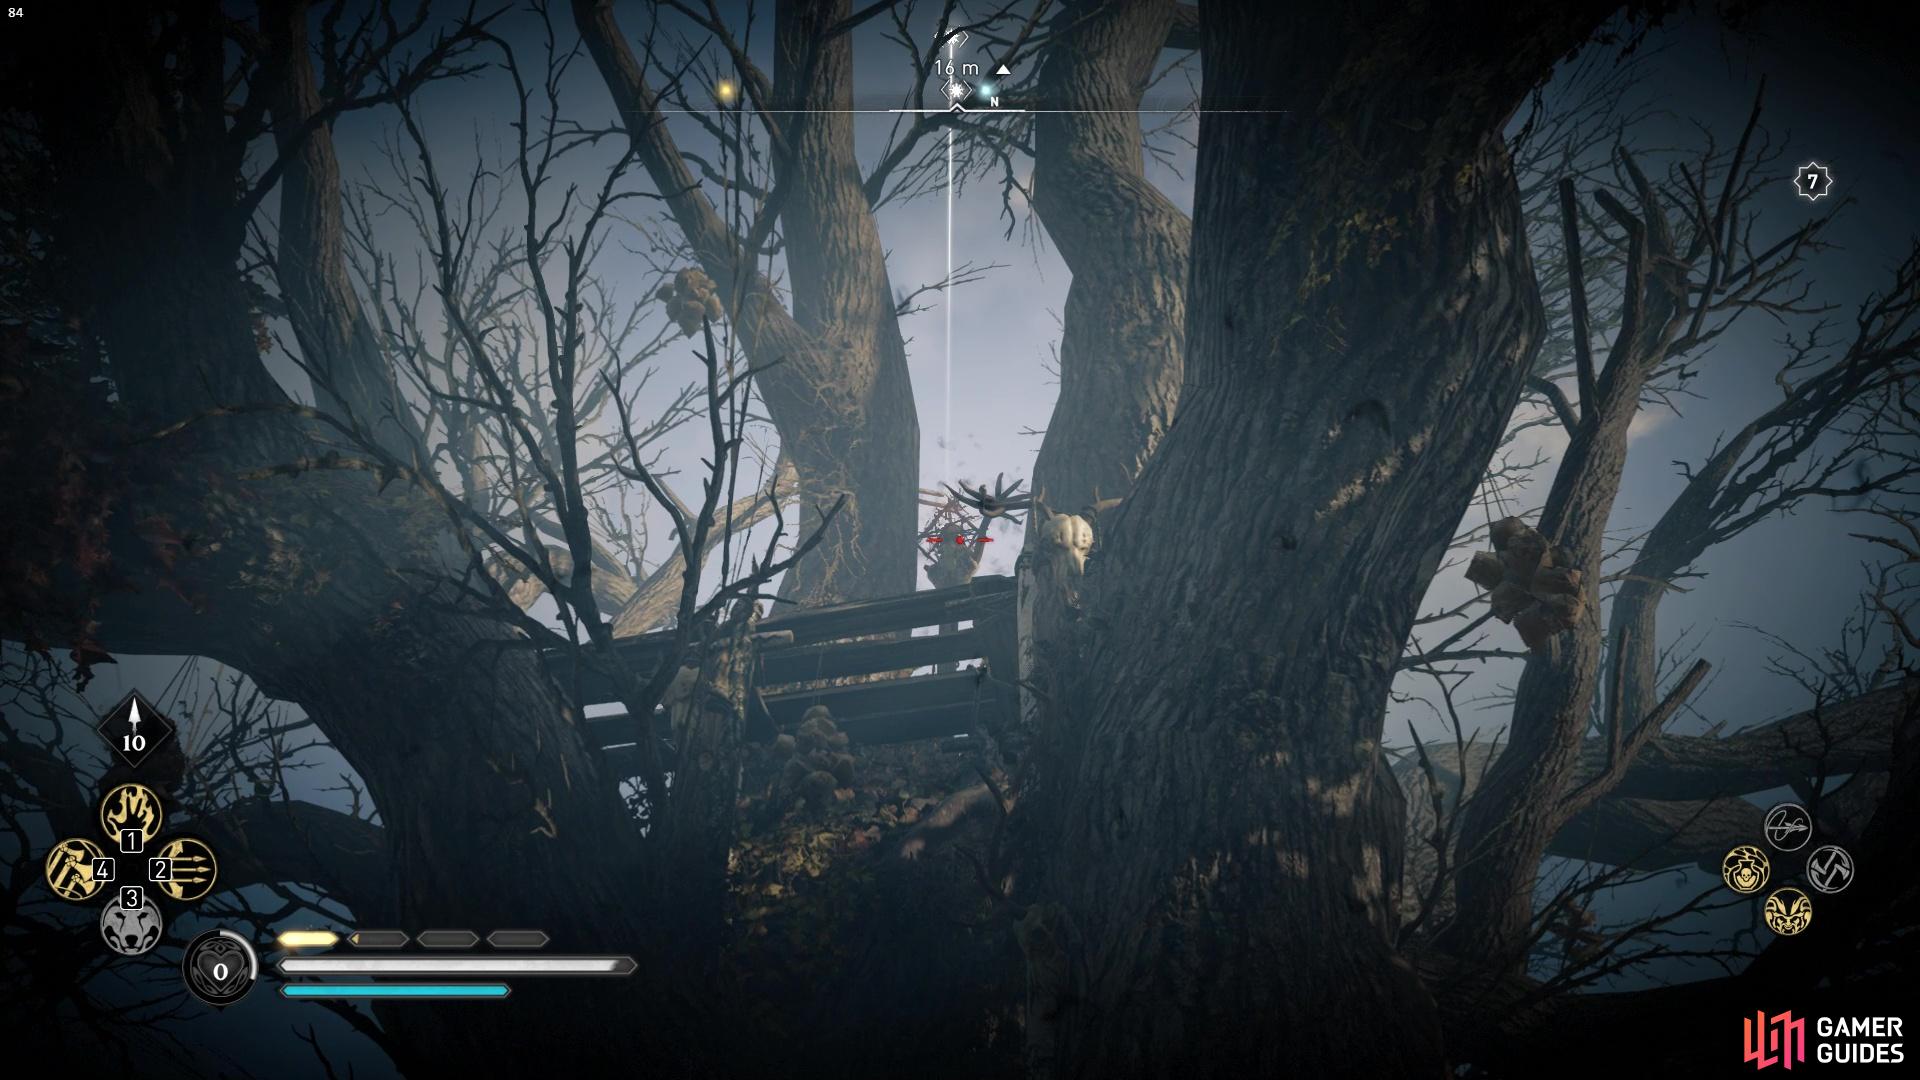 you'll need to shoot up at the cursed symbol in the tree.